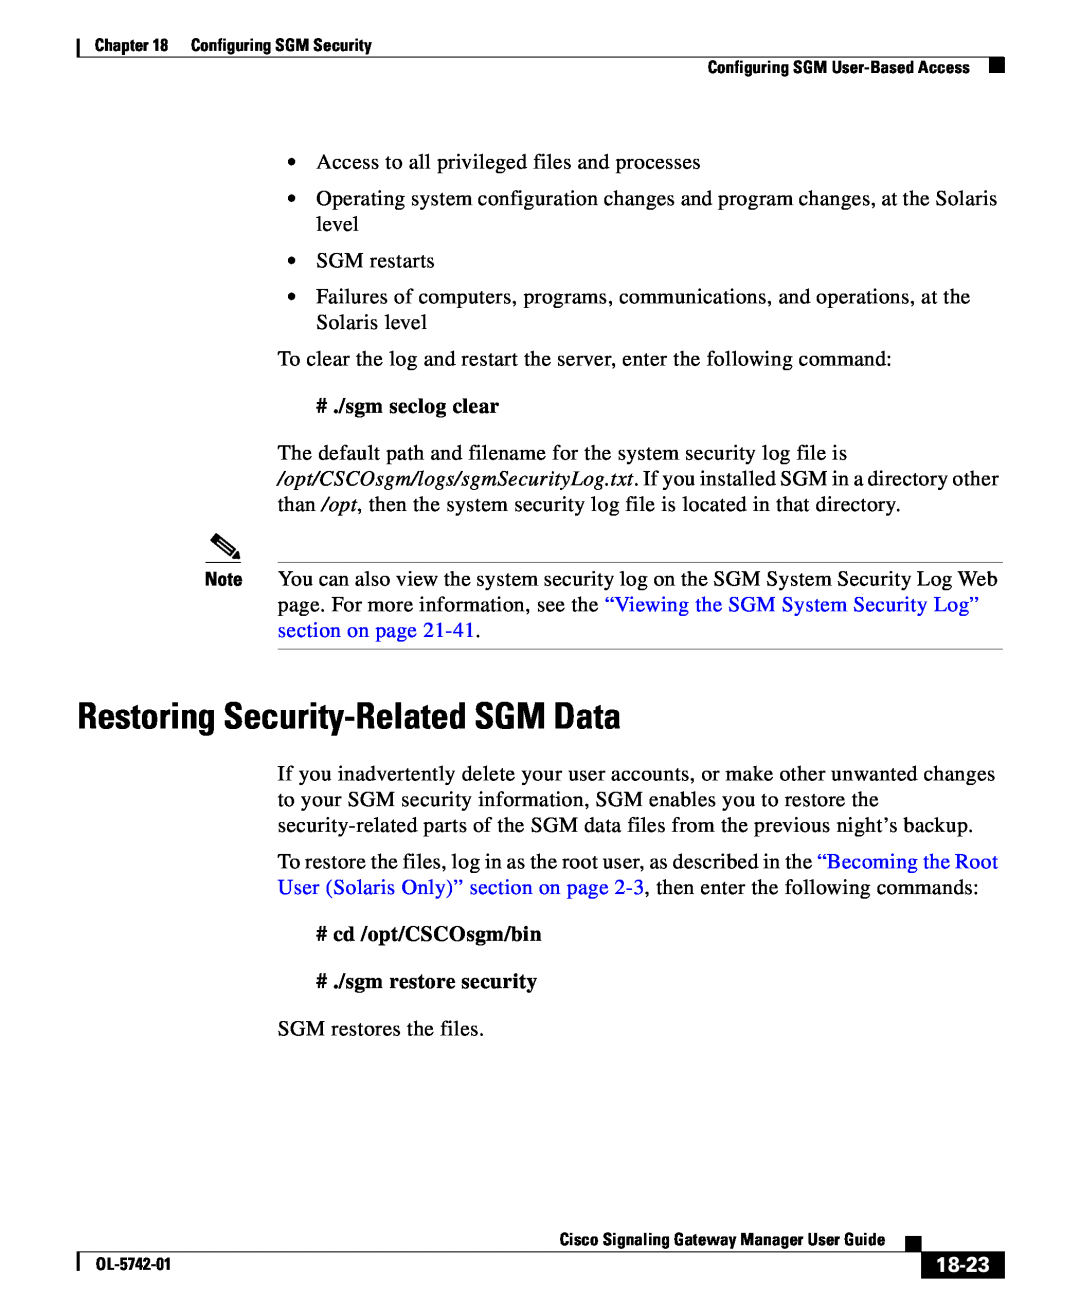 Cisco Systems OL-5742-01 manual Restoring Security-RelatedSGM Data, # ./sgm seclog clear, 18-23 